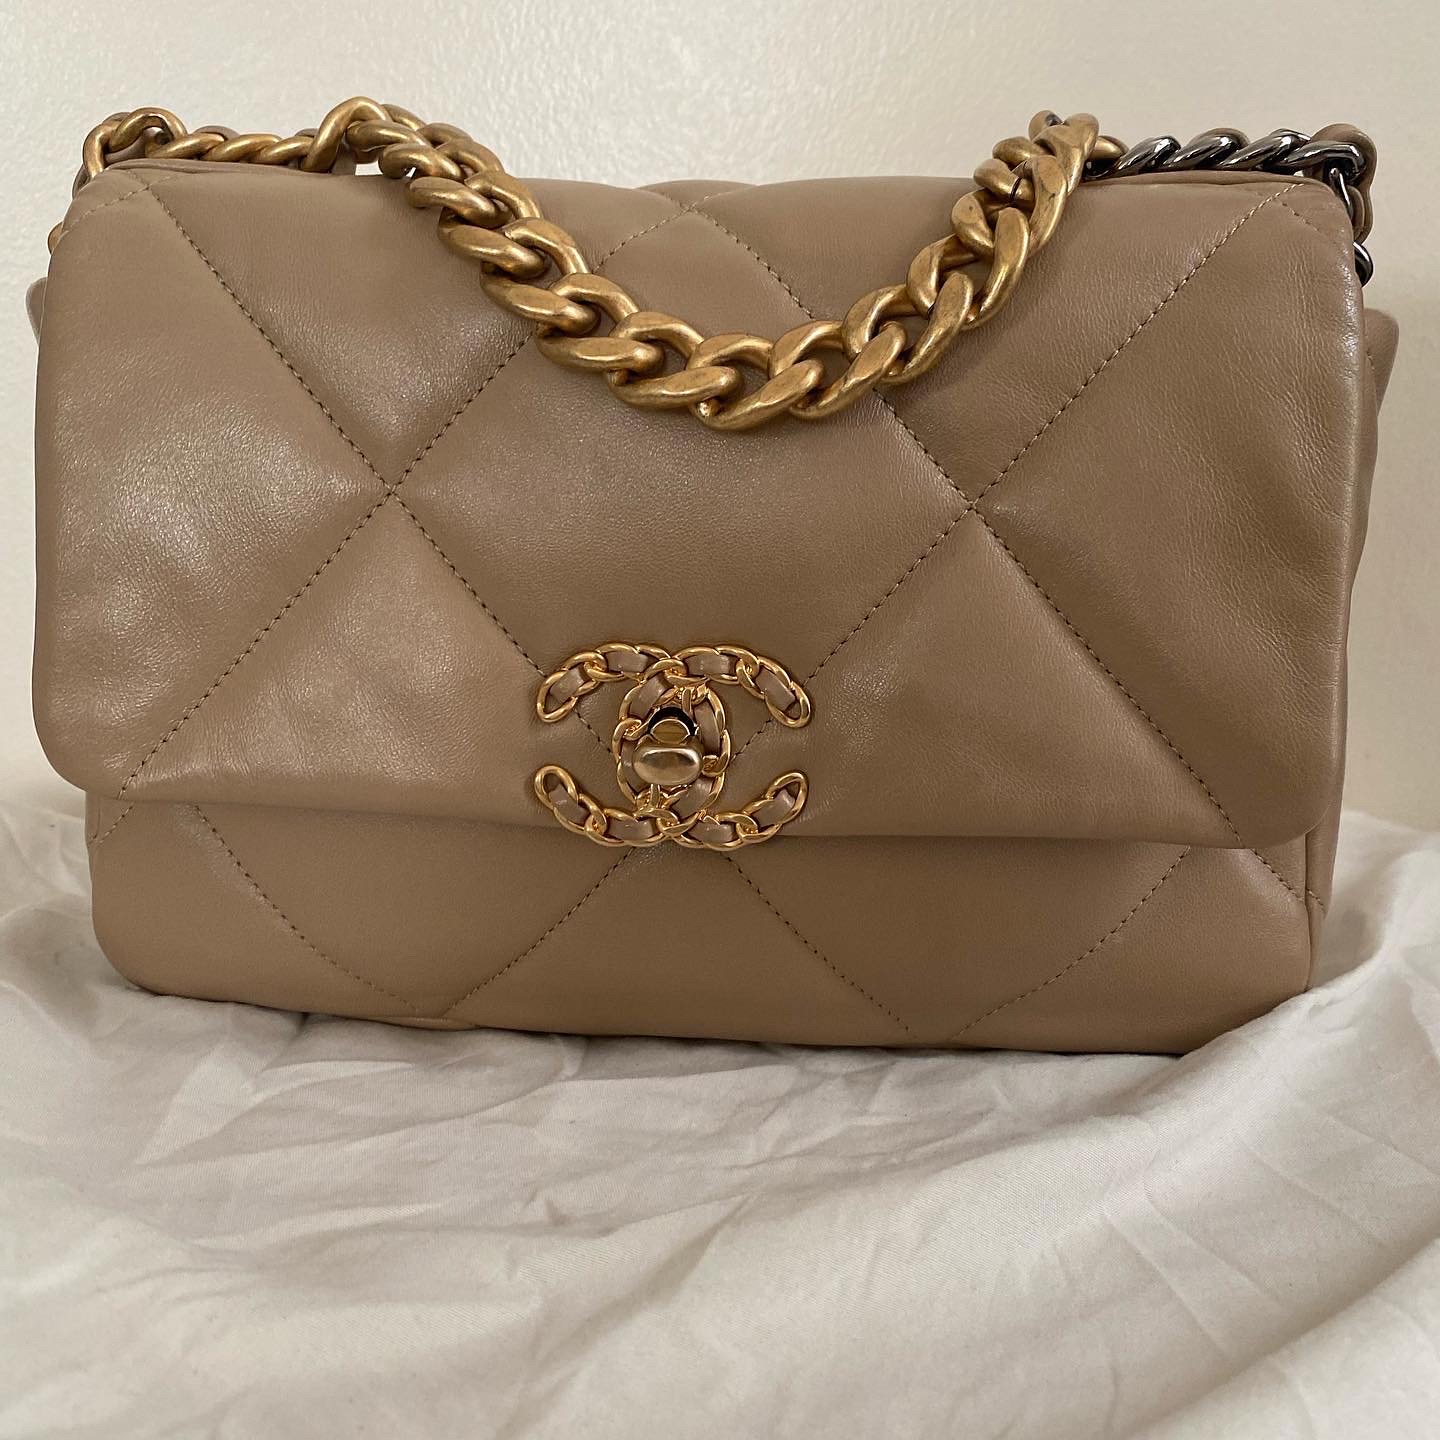 IN EXCELLENT CONDITION AUTHENTIC CHANEL 19 SMALL IN DARK BEIGE